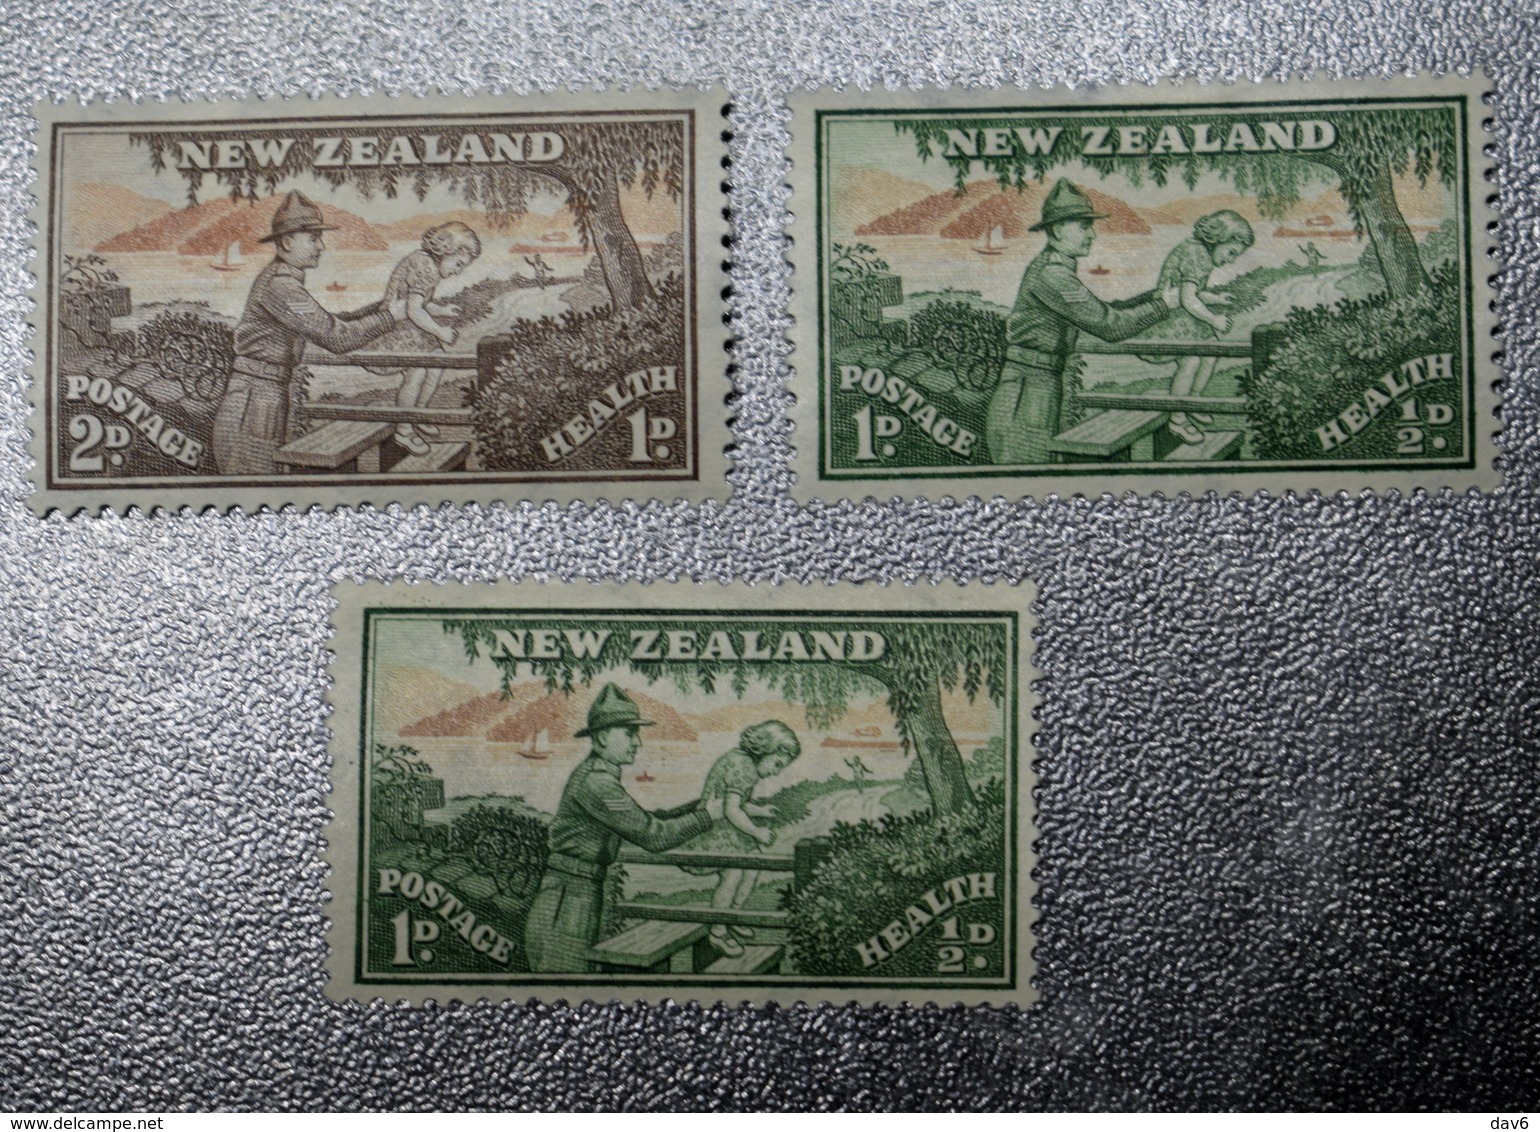 NEW ZEALAND STAMPS    1945 Health Stamps   ~~L@@K~~ - Nuovi